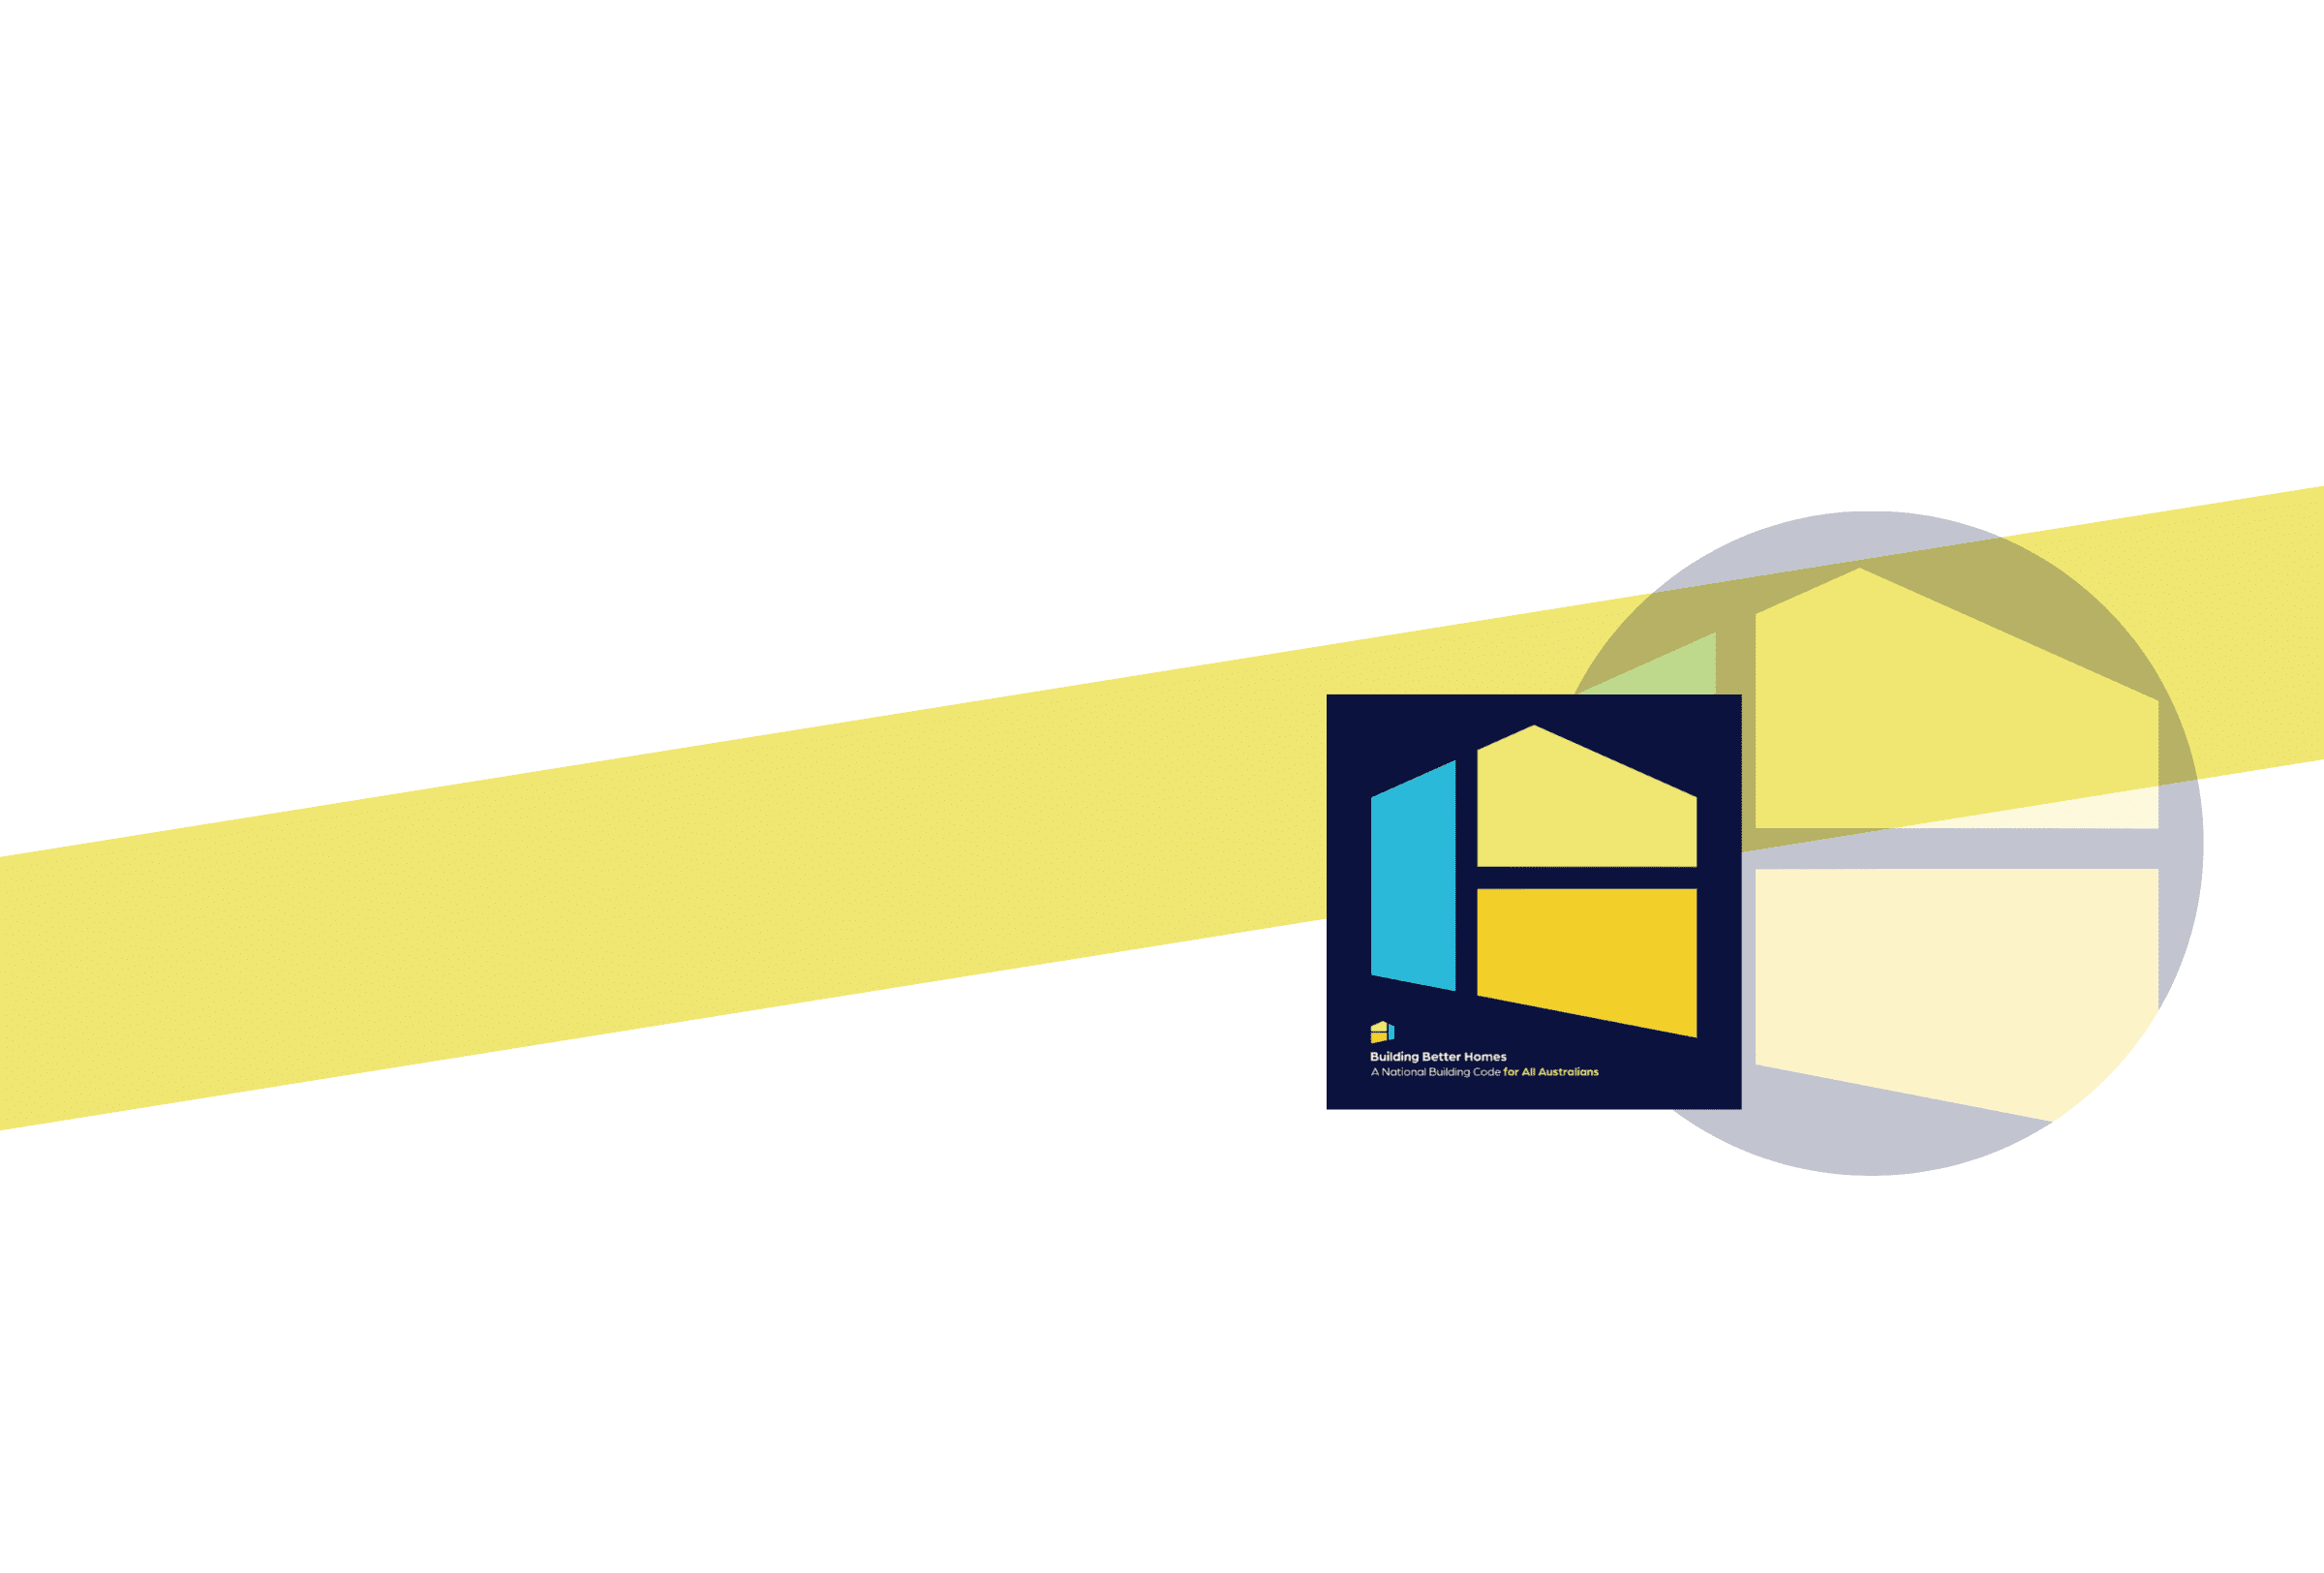 The Building Better Homes logo with a yellow strip behind it. The logo is two shapes put together to look like a house.